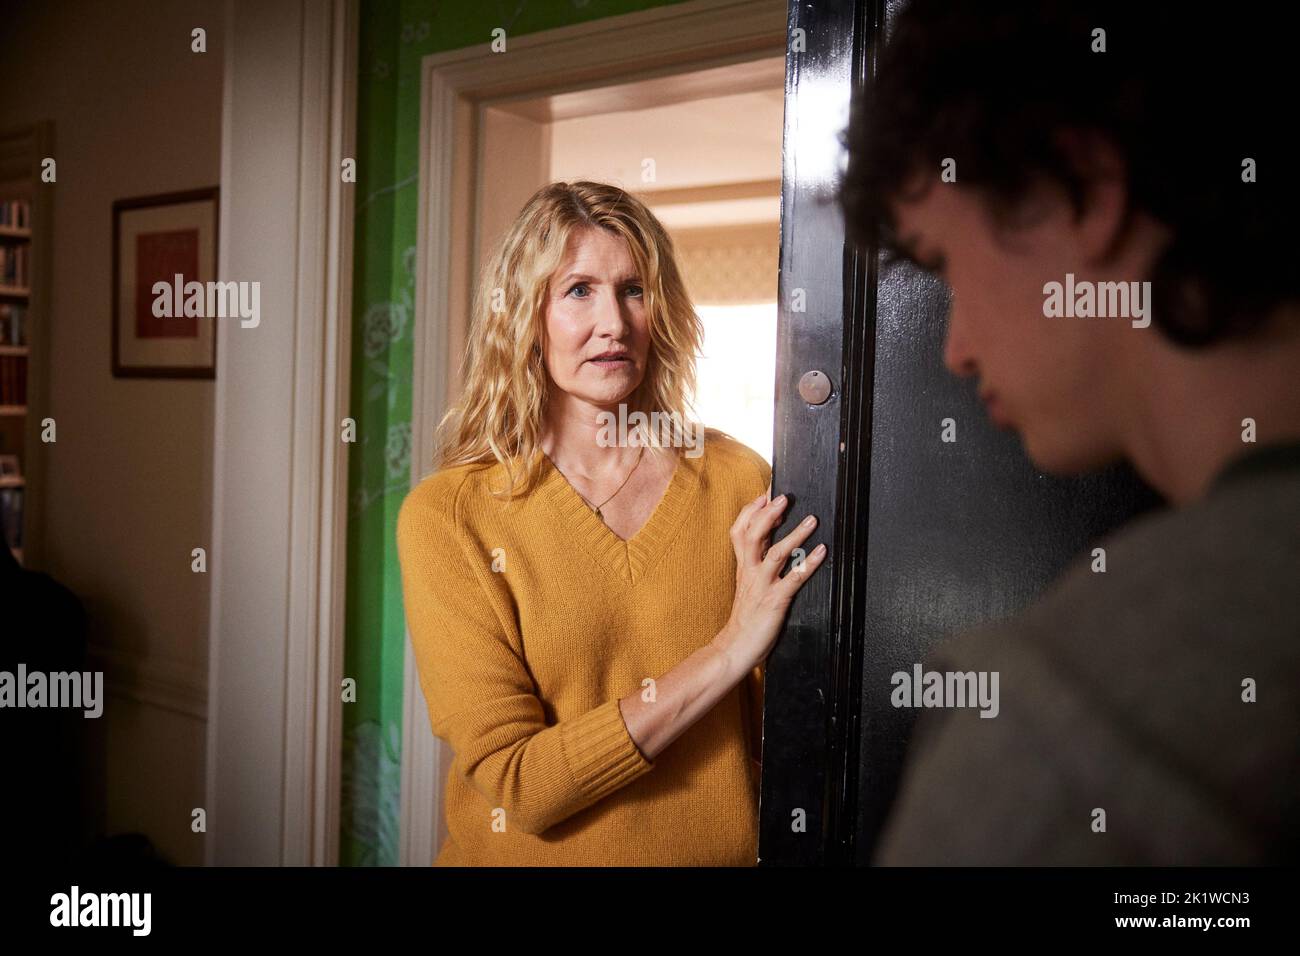 RELEASE DATE: October 9, 2022. TITLE: The Son. STUDIO: Sony Classics Pictures. DIRECTOR: Florian Zeller. PLOT: Peter as his busy life with new partner Emma and their baby is thrown into disarray when his ex-wife Kate turns up with their teenage son, Nicholas. STARRING: LAURA DERN as Kate, ZEN MCGRATH as Nicholas (Credit Image: © Sony Classics Pictures/Entertainment Pictures) Stock Photo